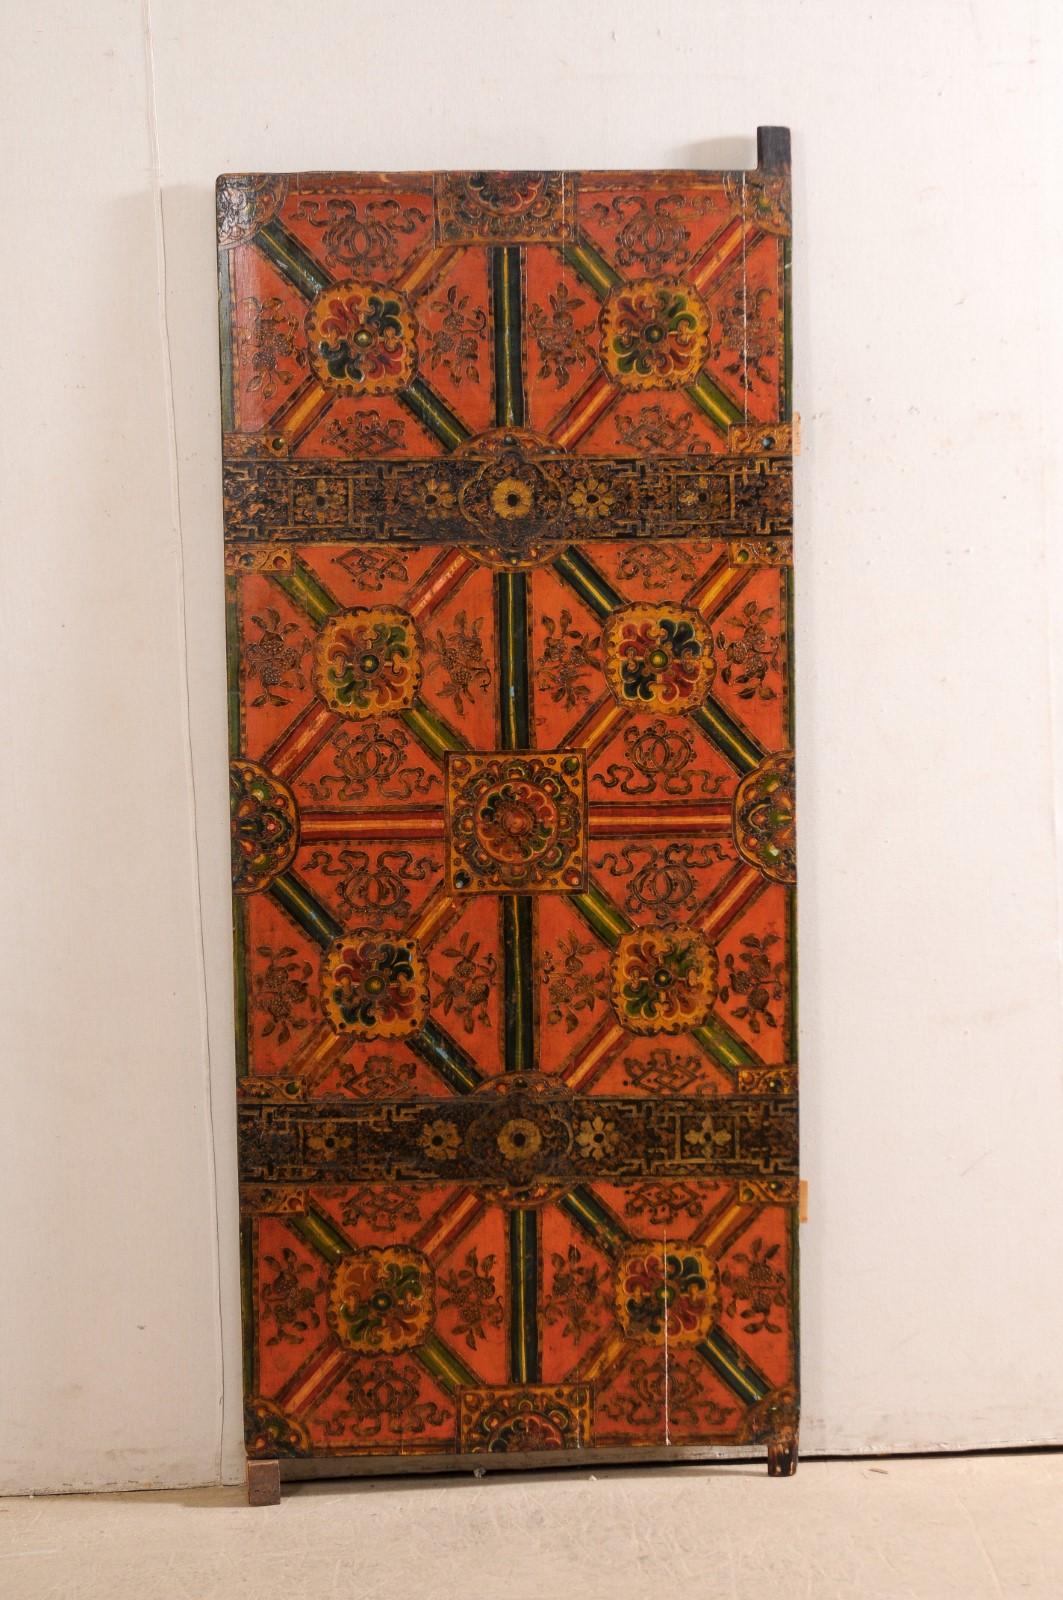 A Tibetan single artfully hand-painted wood door. This delightful vintage door from Tibet features an eight panel front design, which has been created in an artistic hand-painted motif of geometric and floral patterns. The palette is a festive